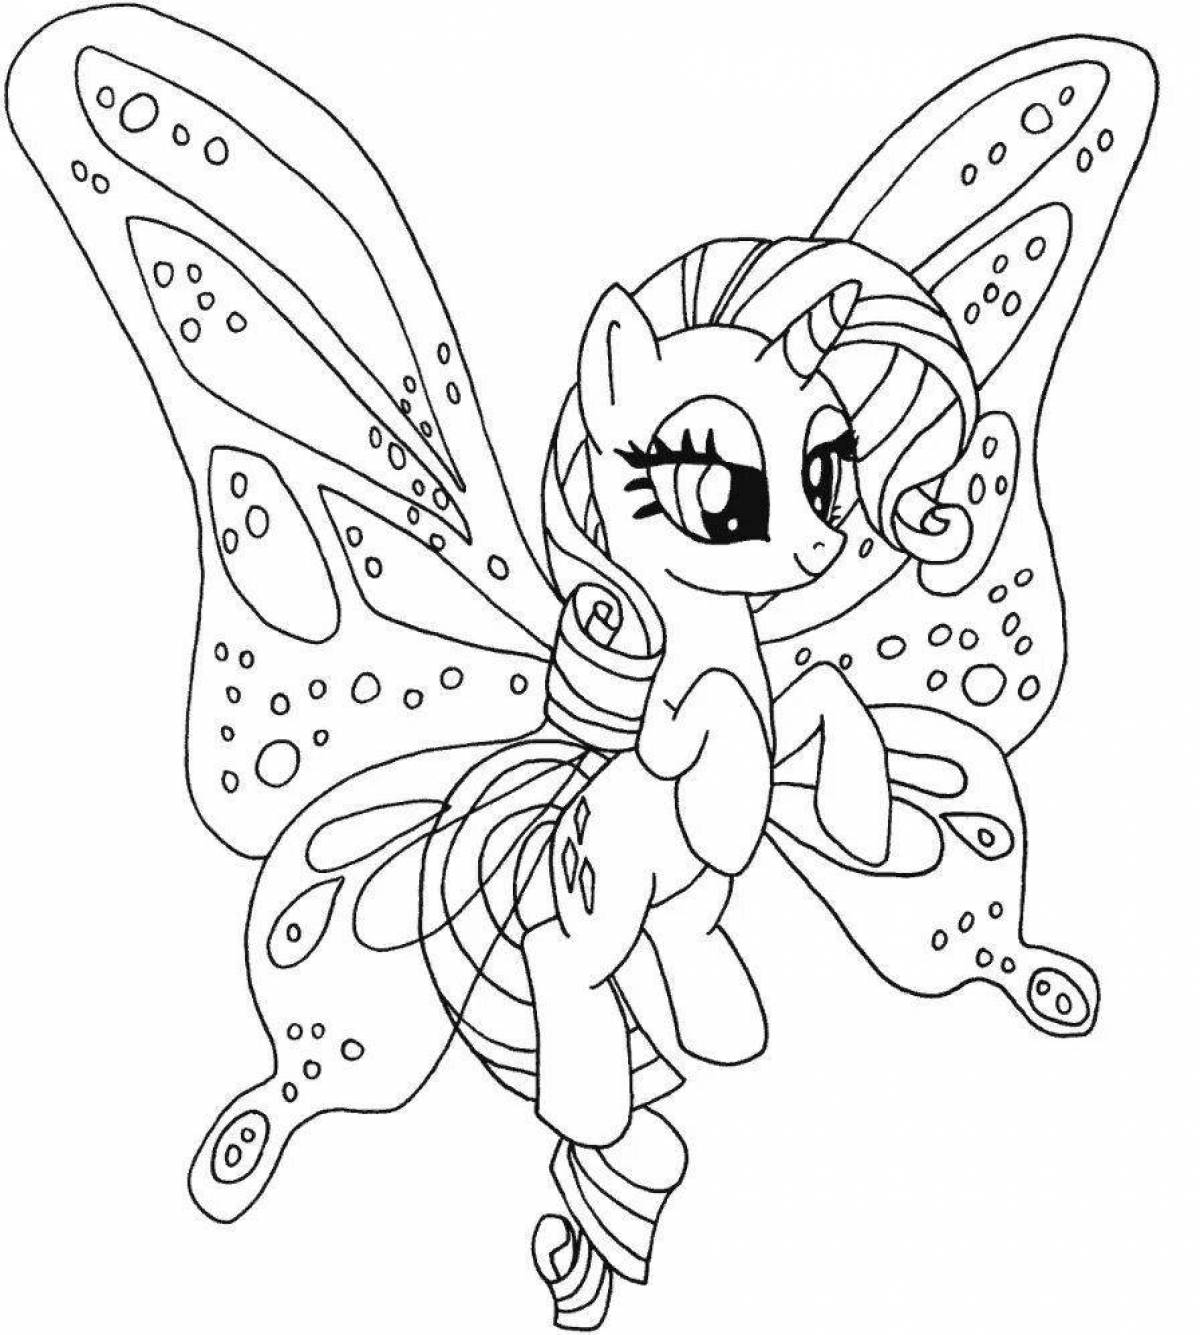 Playful pony light coloring page